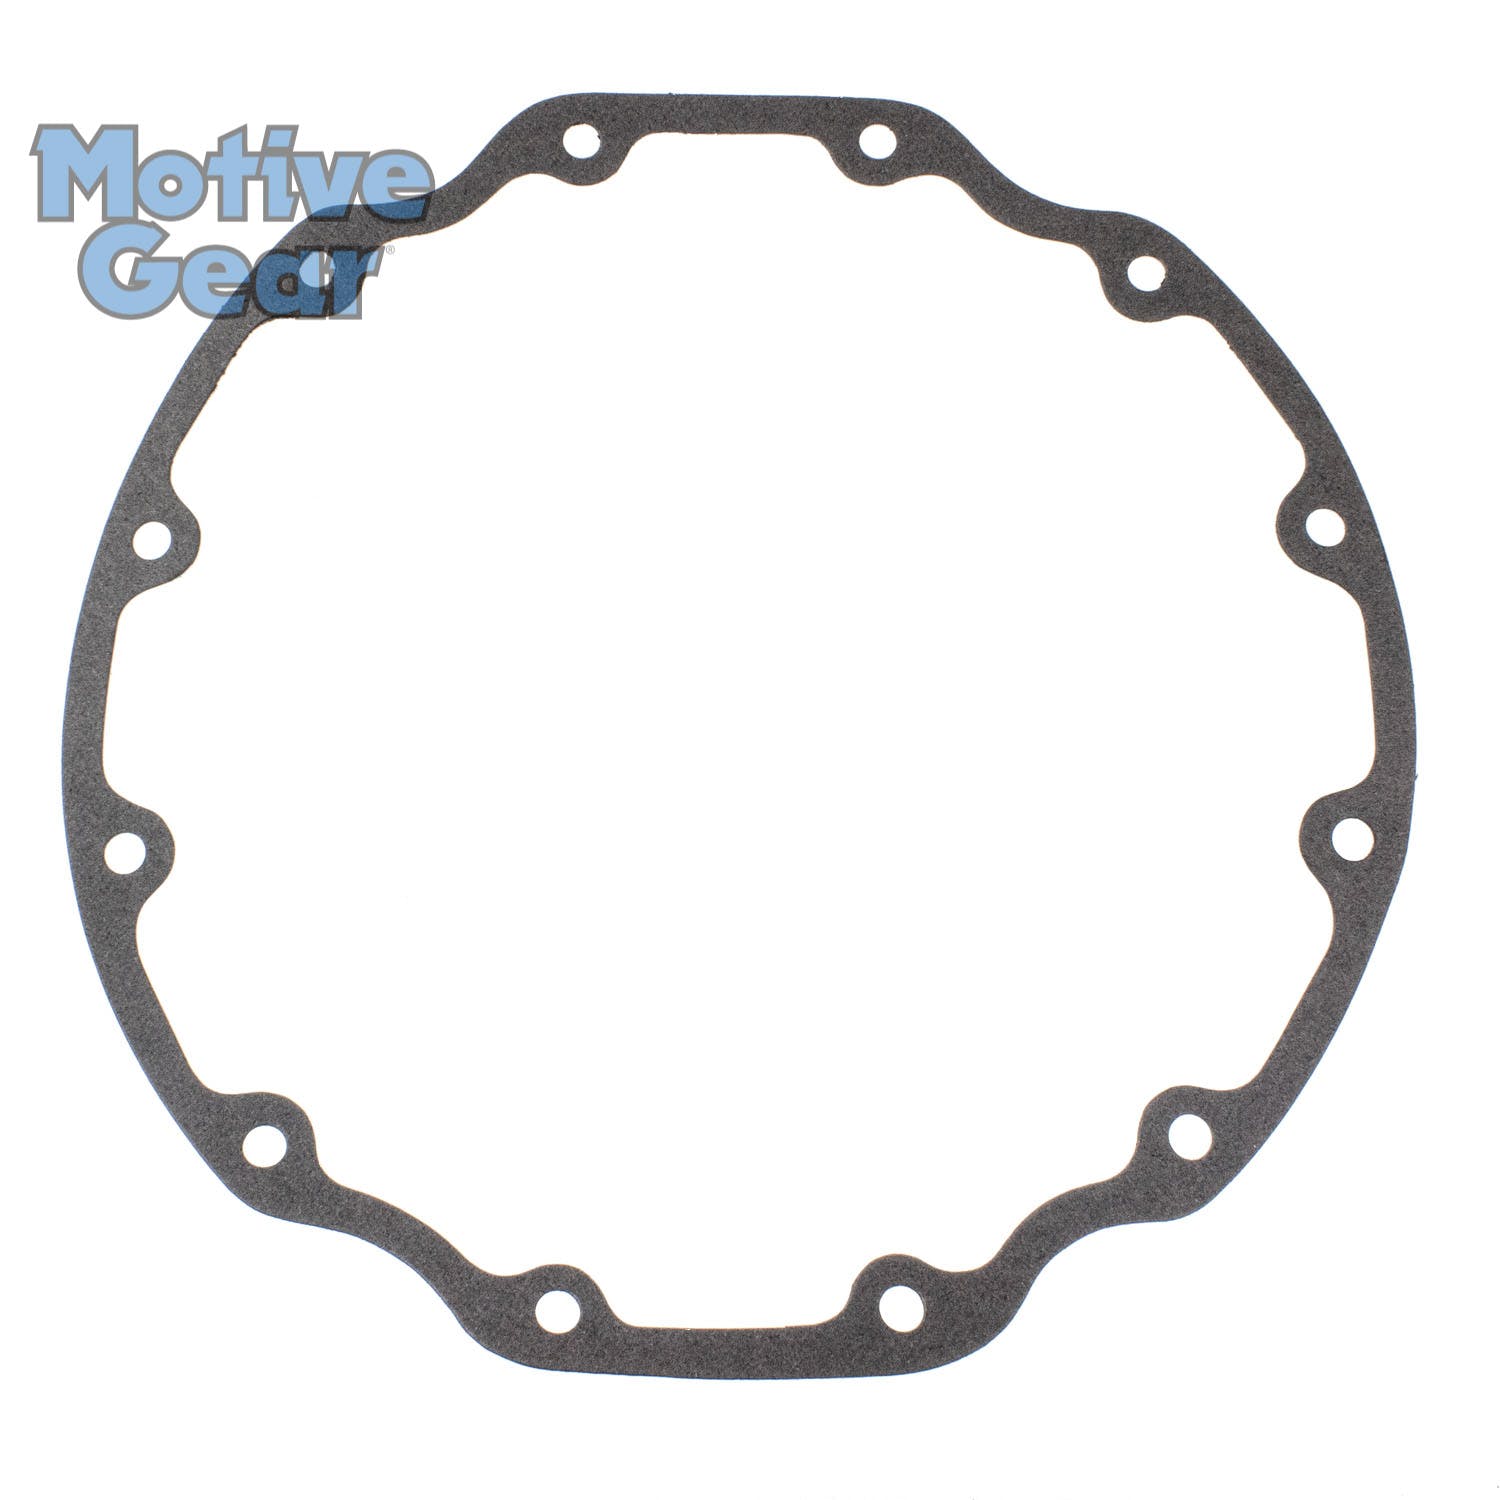 Motive Gear 5135 GASKET Differential Cover Gasket